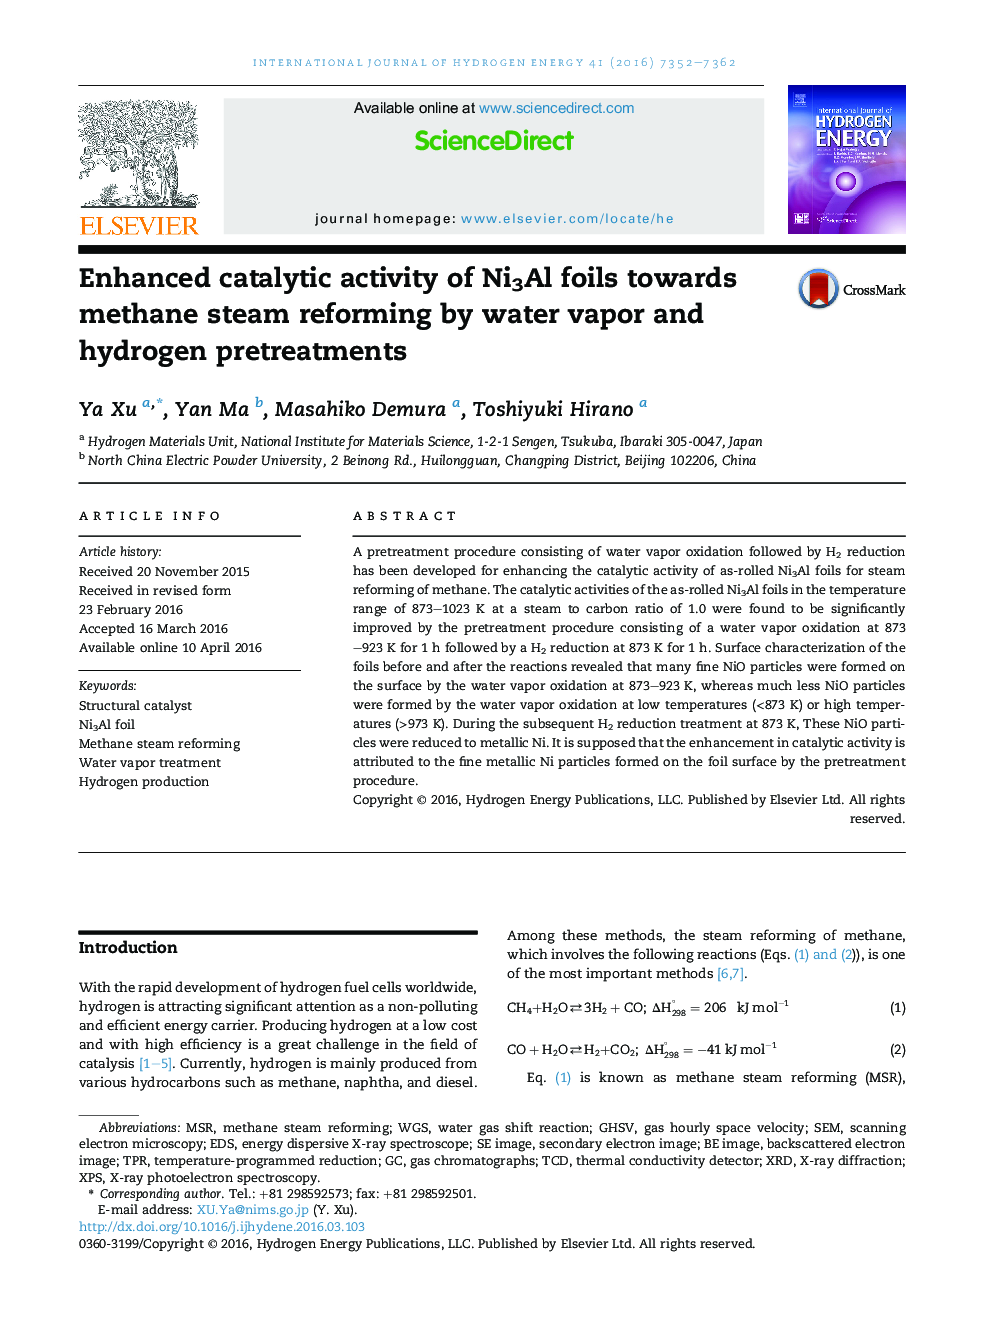 Enhanced catalytic activity of Ni3Al foils towards methane steam reforming by water vapor and hydrogen pretreatments